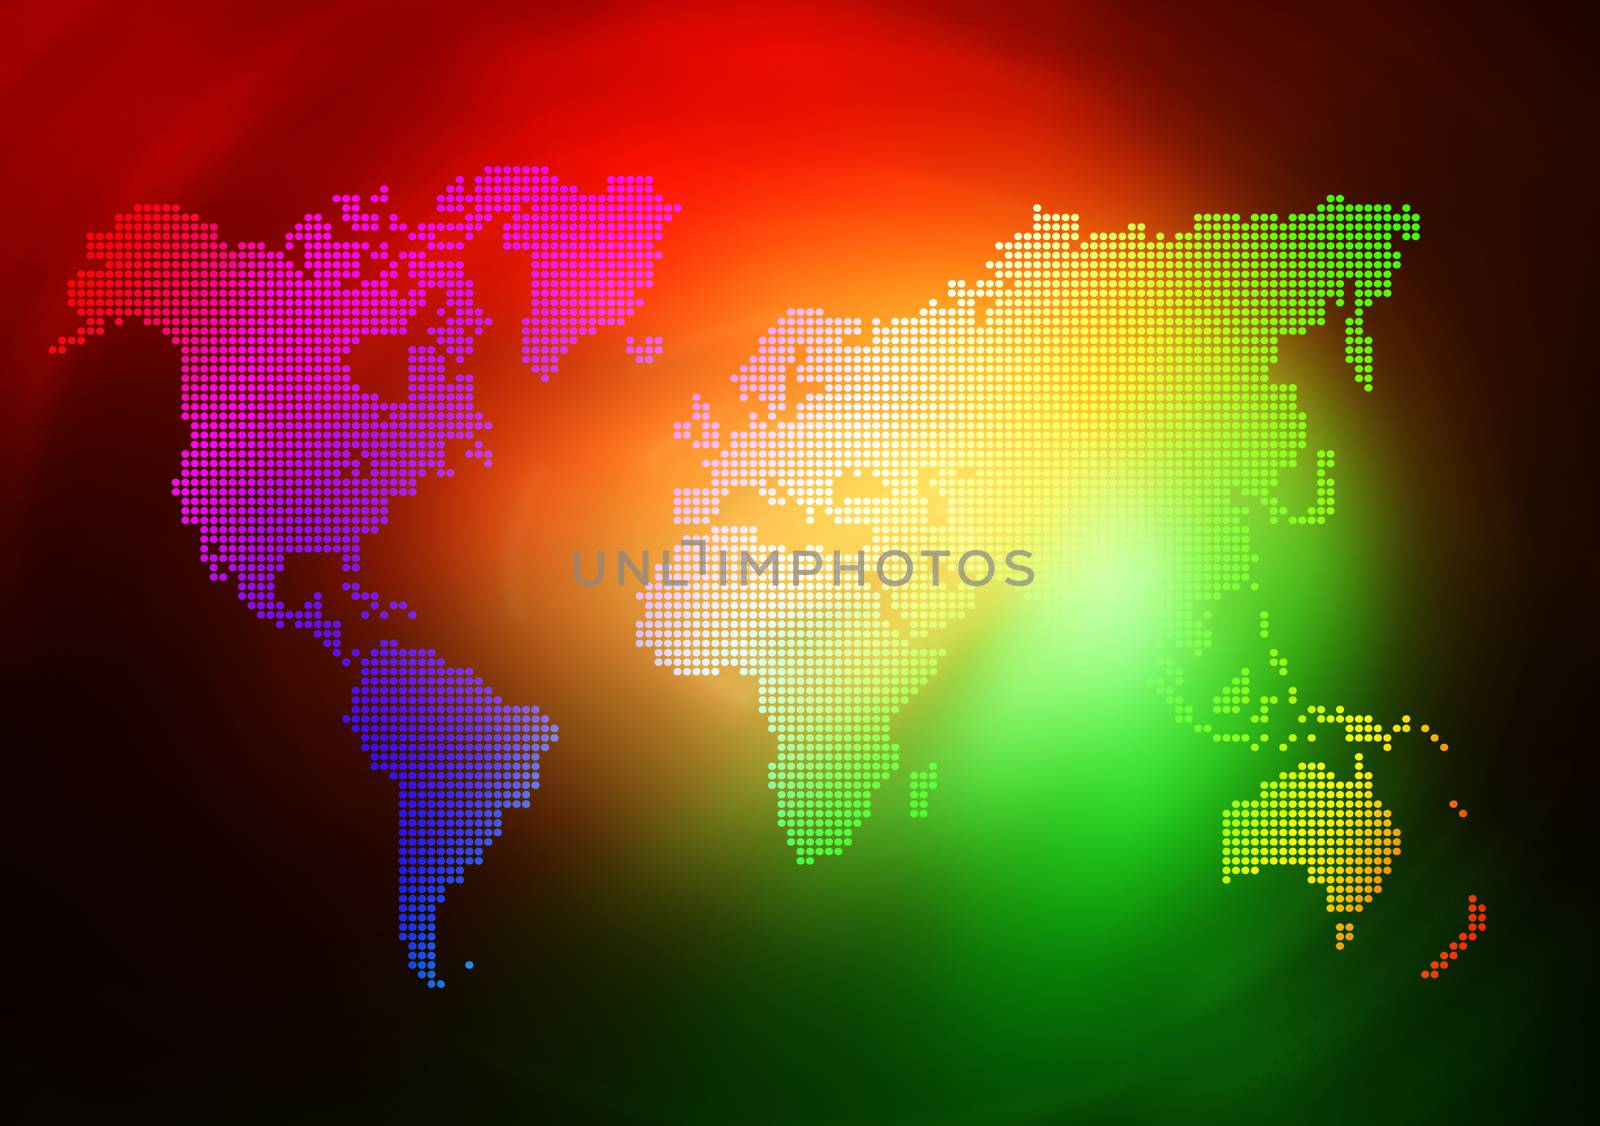 Dot World map business background. Red and green colors lights on background